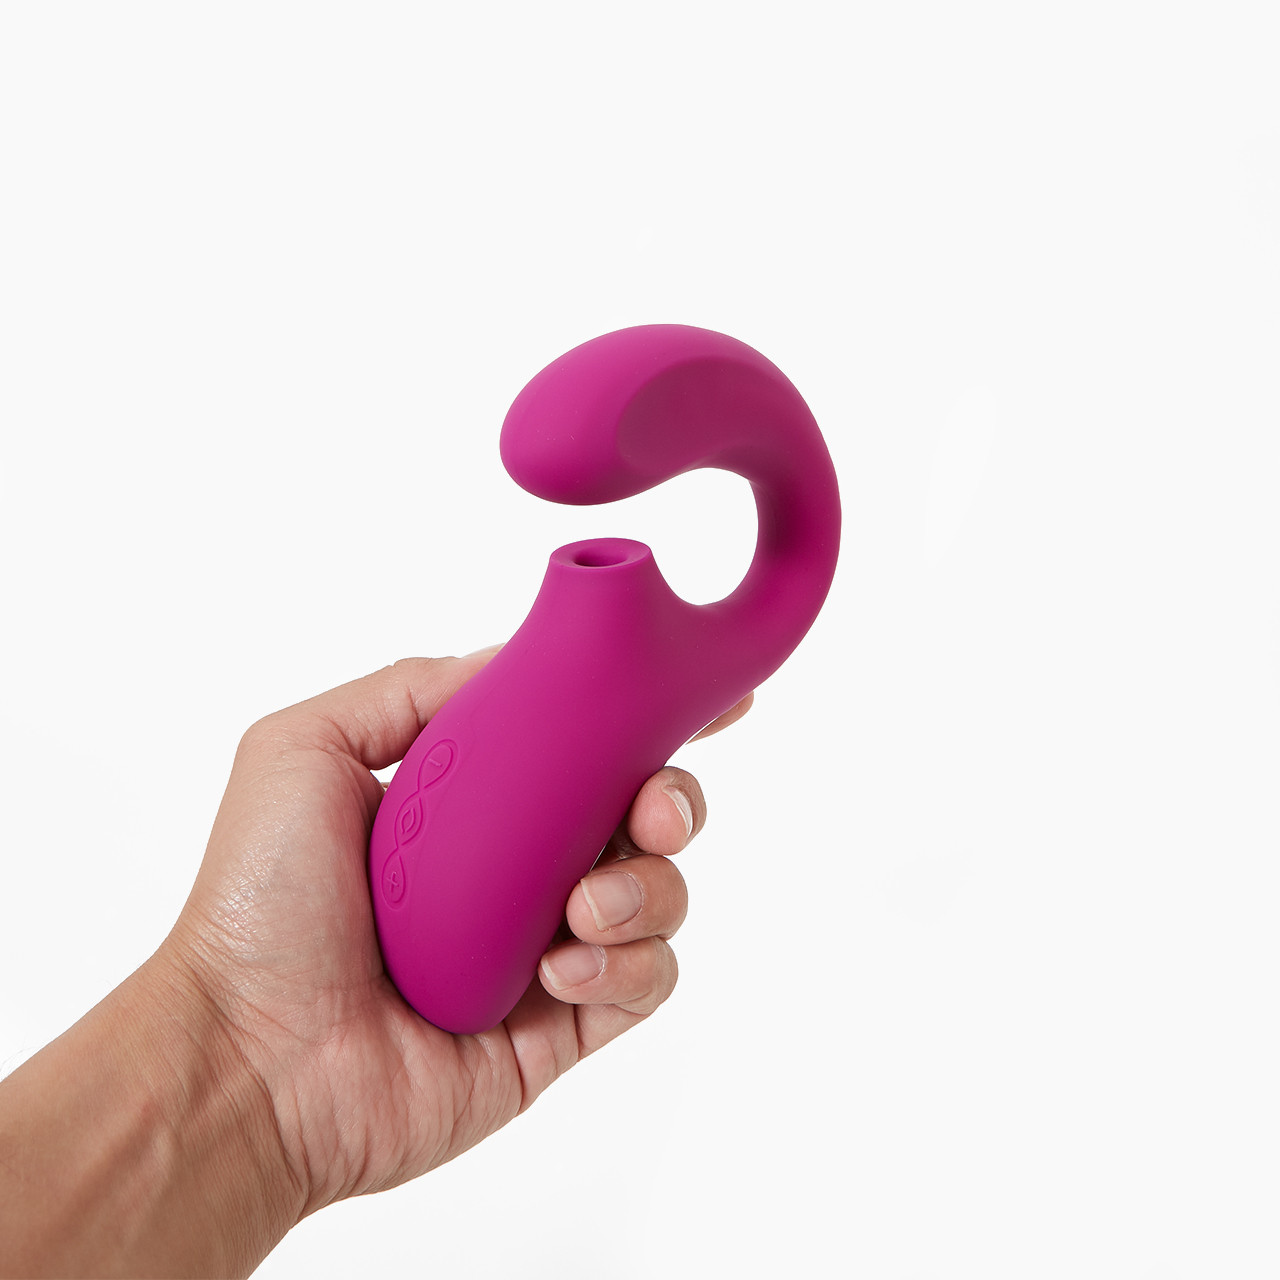 Lelo Enigma dual stimulating suction toy held in hand